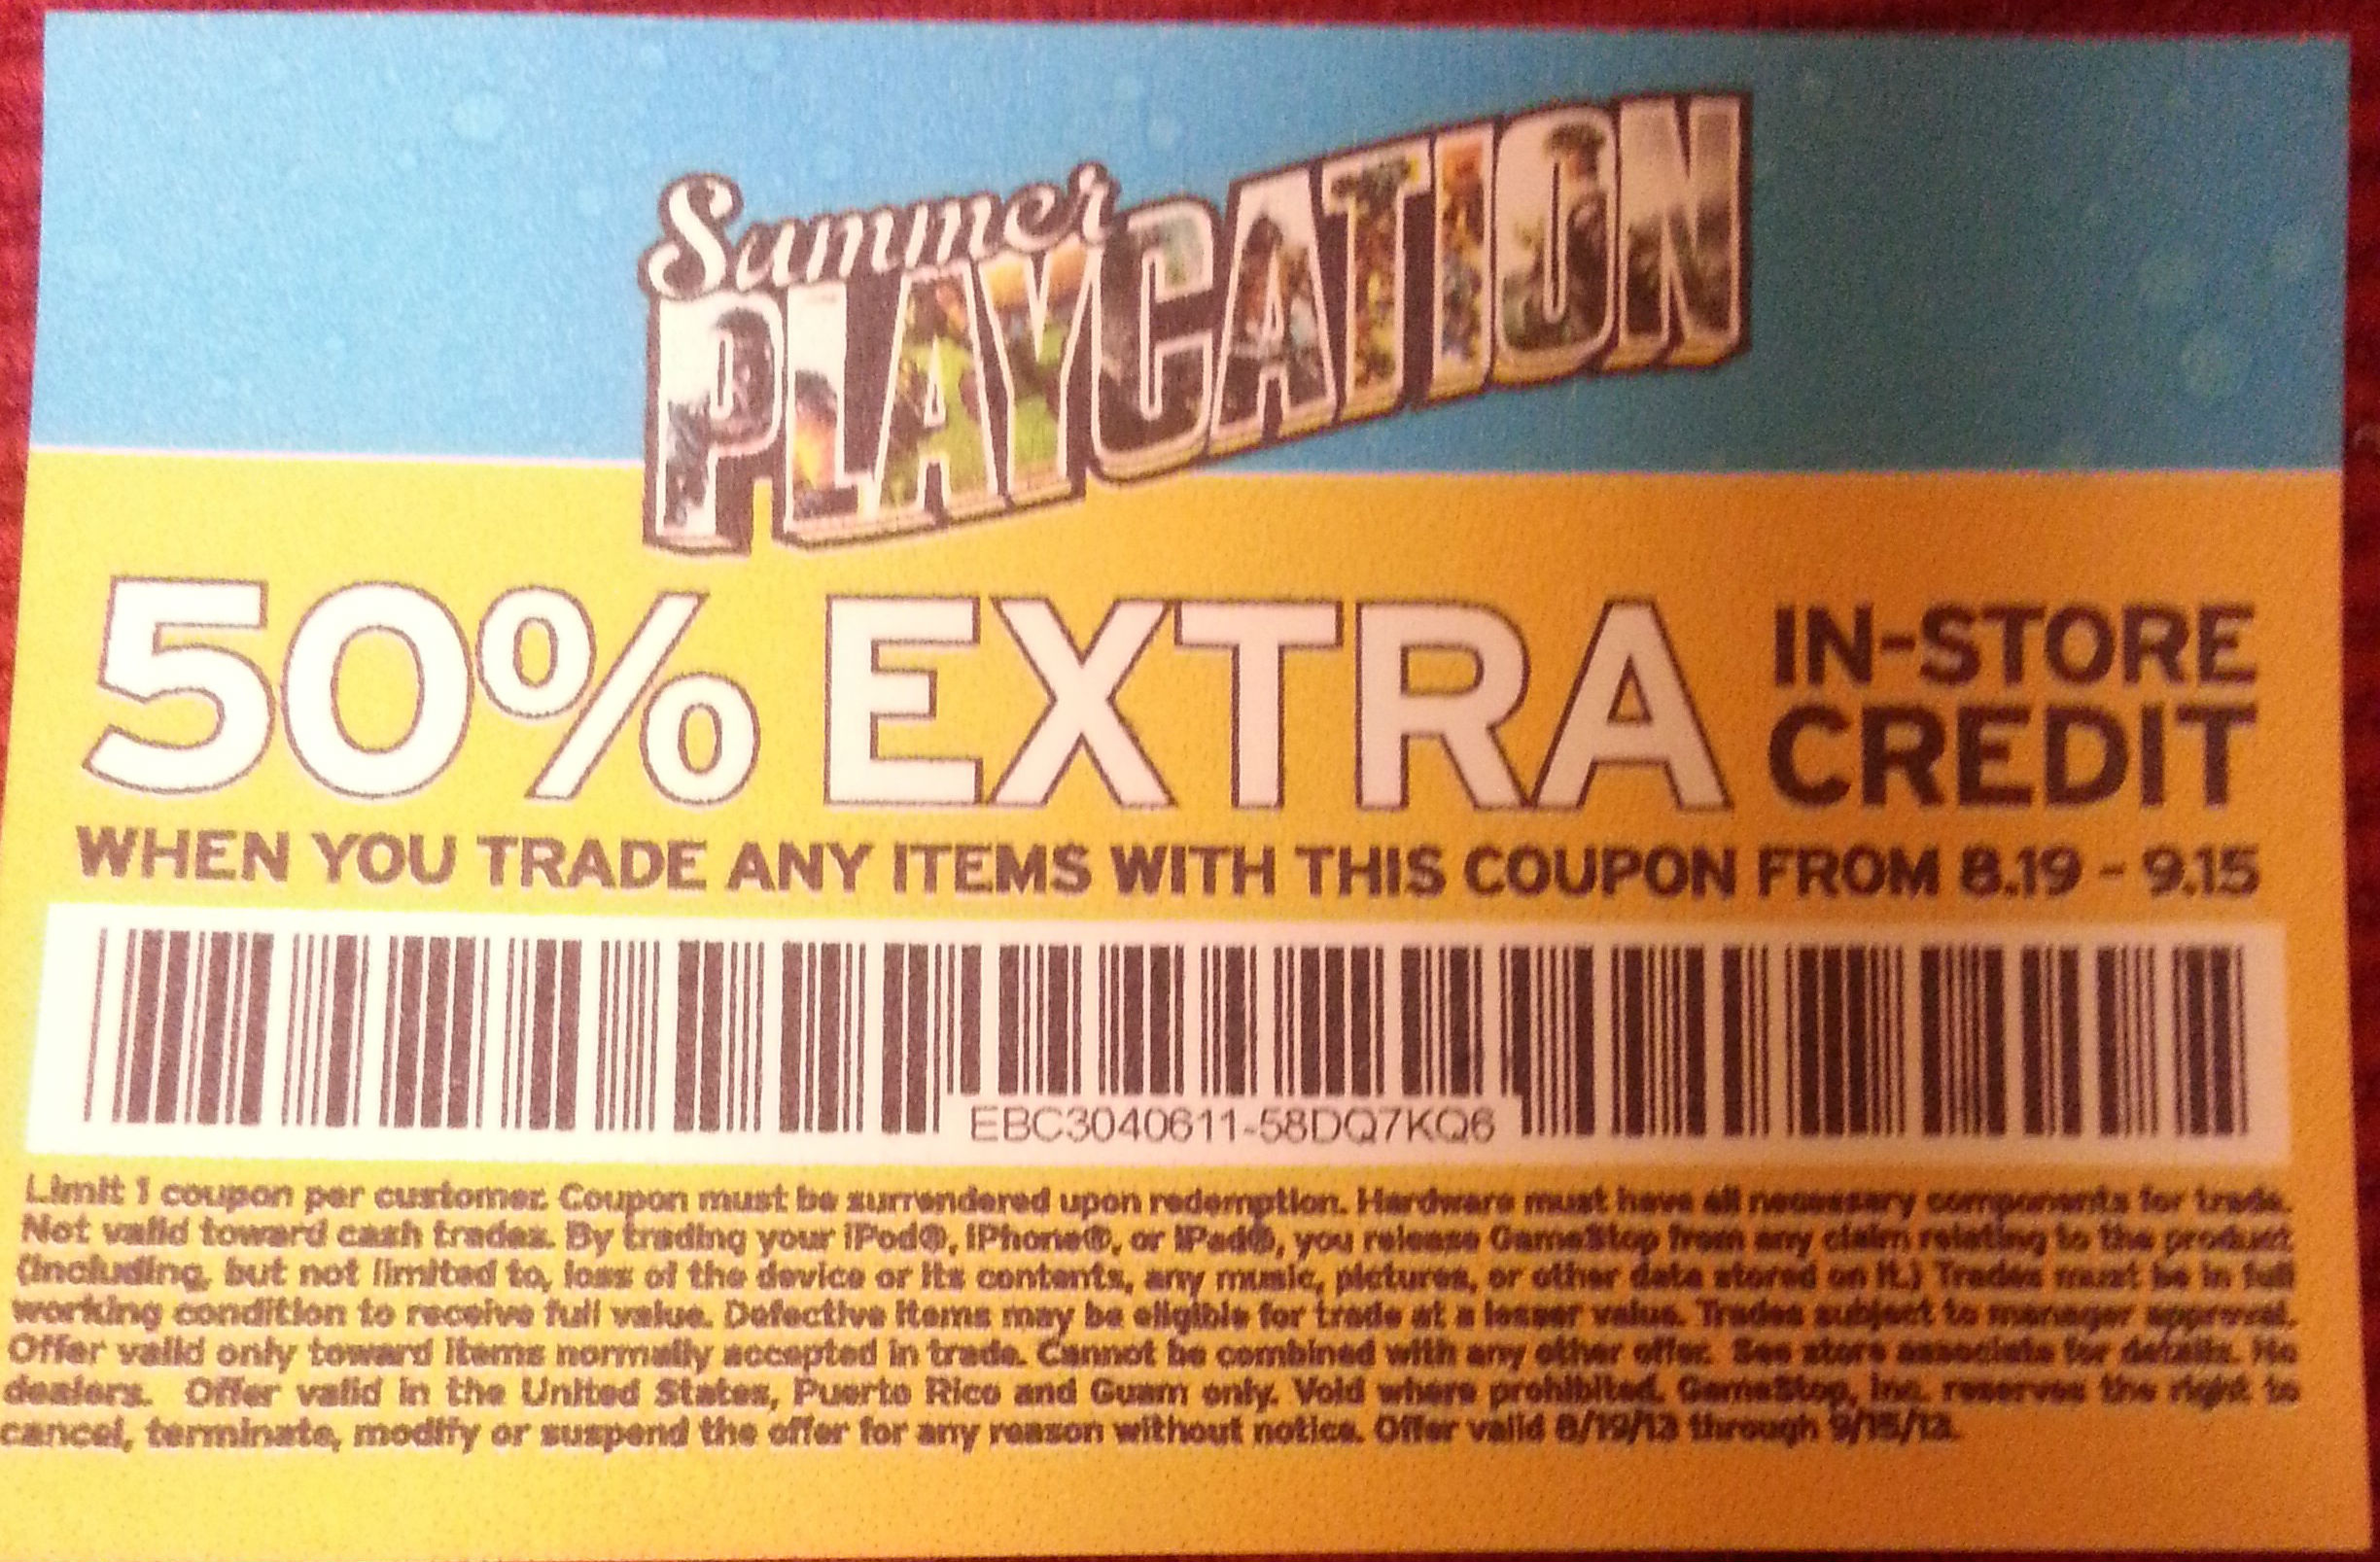 GameStop trade in bonus coupon - for some reason we don't have an alt tag here